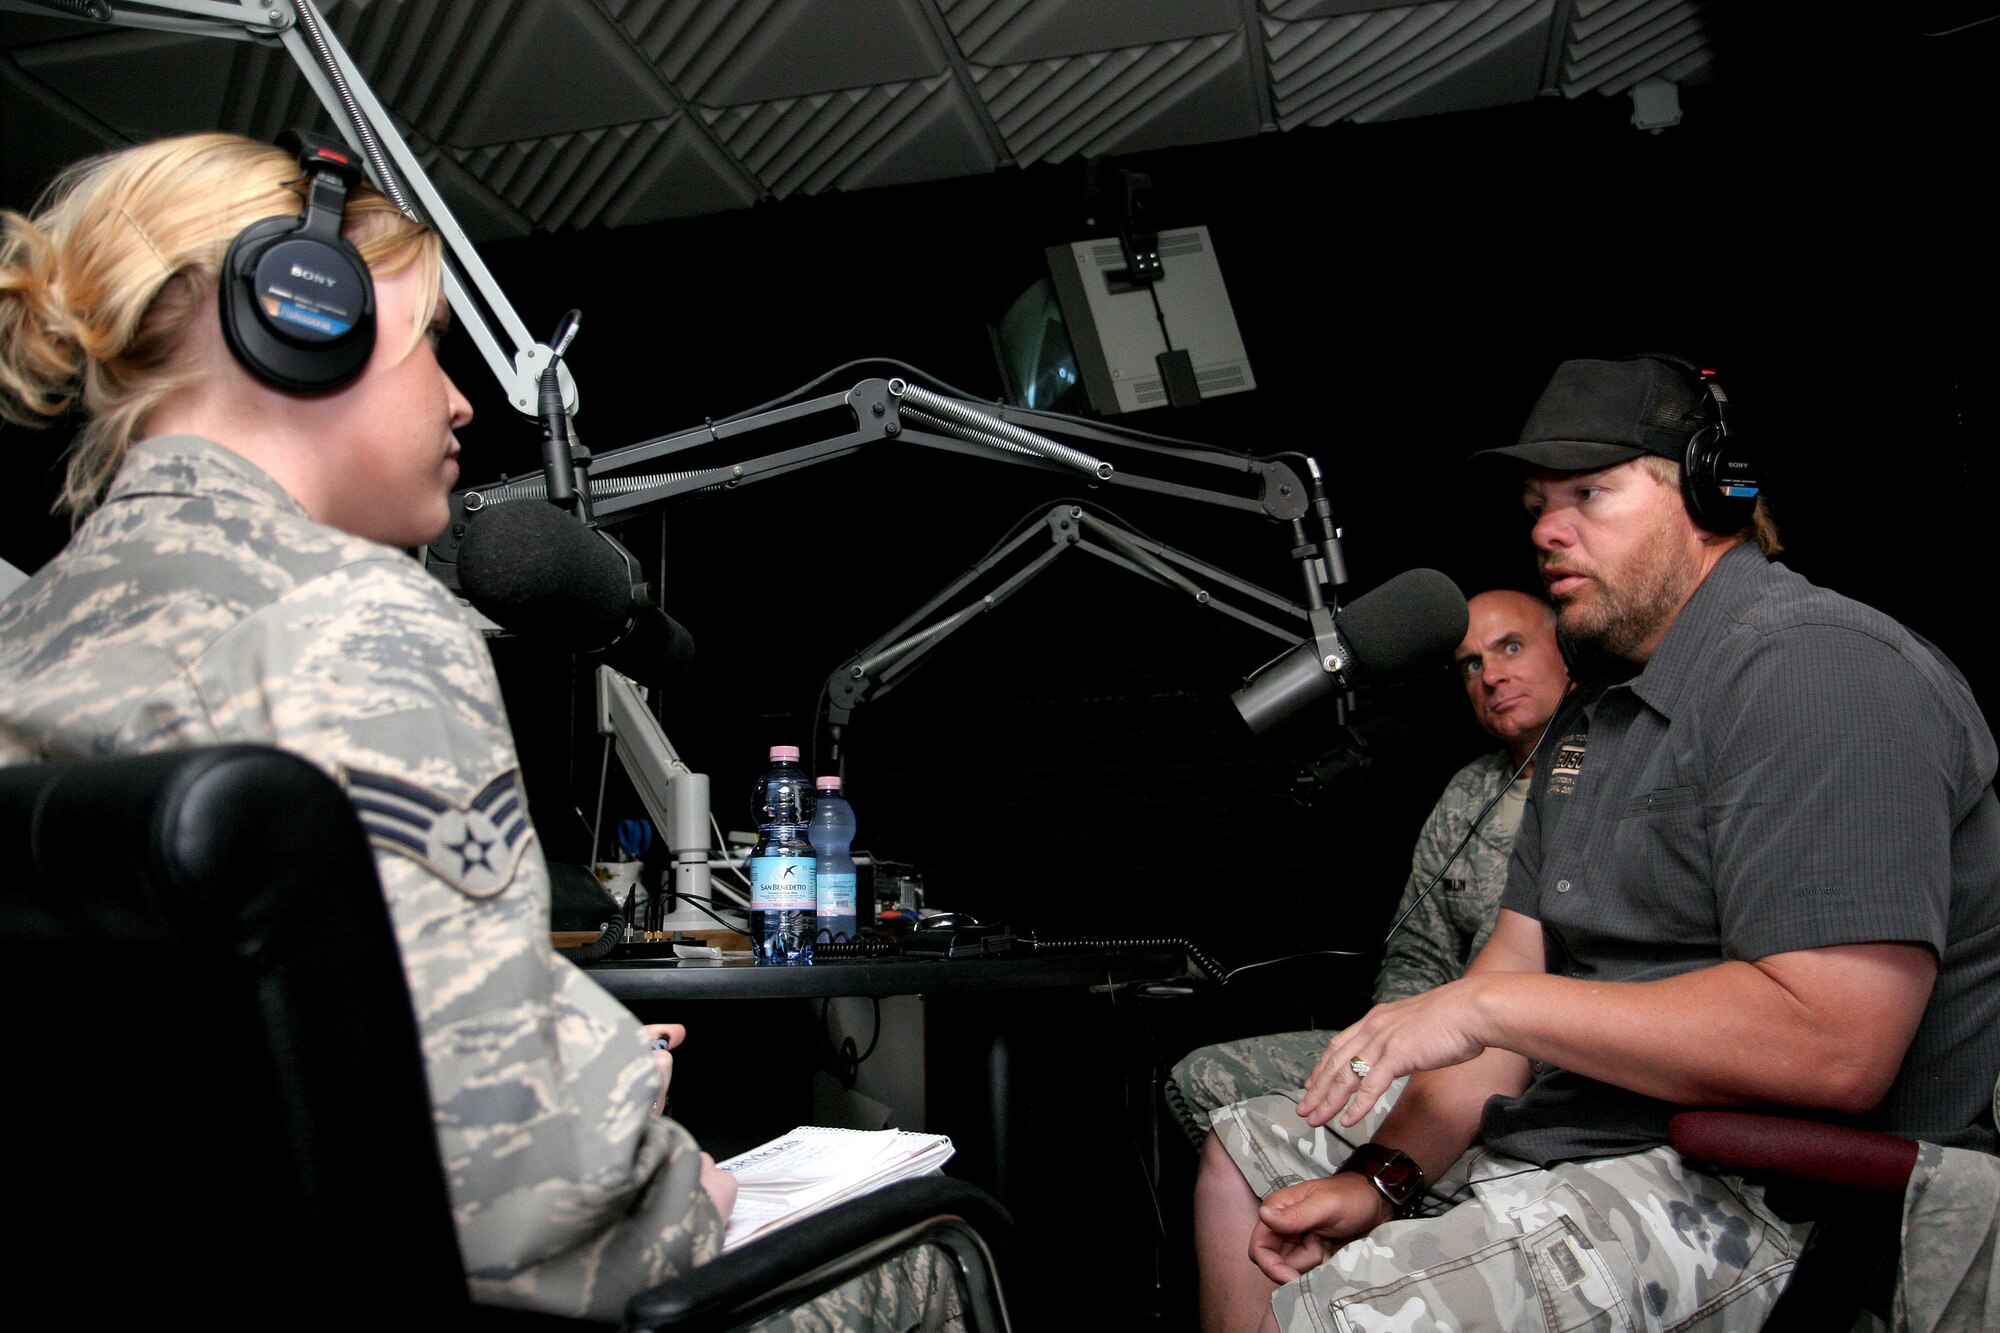 Brig. Gen. Craig Franklin, 31st Fighter Wing commander, and country music superstar Toby Keith, are interviewed by Senior Airman Caitlin Jones on American Forces Network Aviano's ZFM 106 morning show at Aviano Air Base, Italy, April 29.  Mr. Keith just returned from Afghanistan where he was entertaining the troops on his USO sponsored "America's Toughest Tour 2009".  He stopped by Aviano before continuing the tour with a concert at Camp Darby, Italy, April 29 and U.S. Army Garrison Vicenza, Italy April 30.  (U.S. Air Force photo/Senior Master Sgt. Robert W. Valenca) 